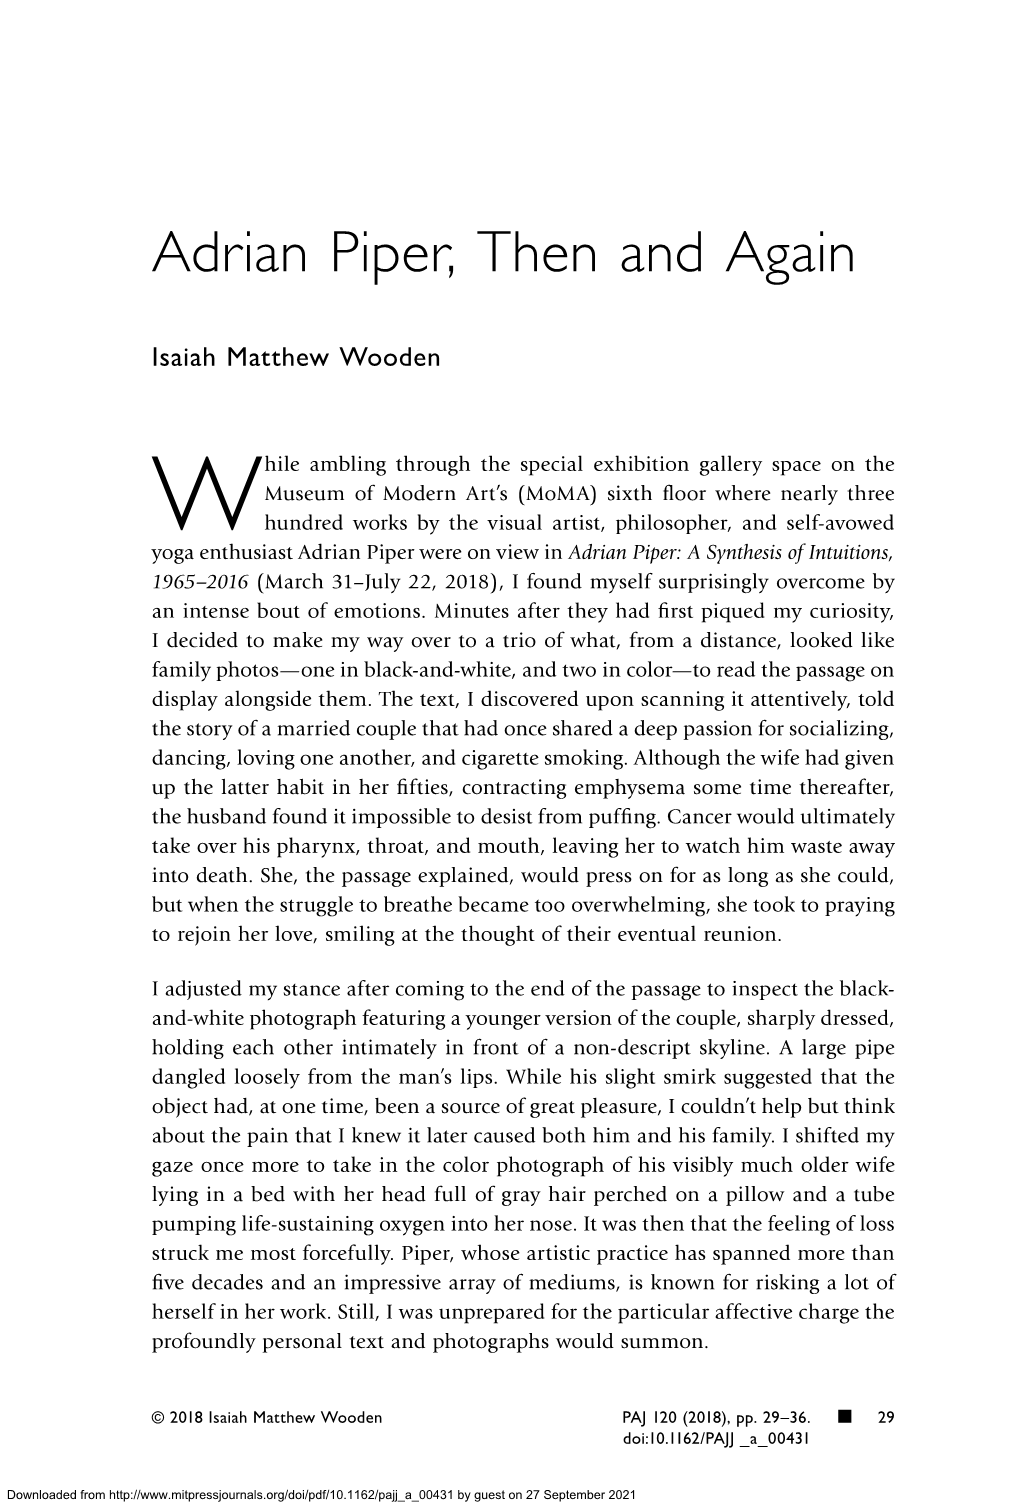 Adrian Piper, Then and Again